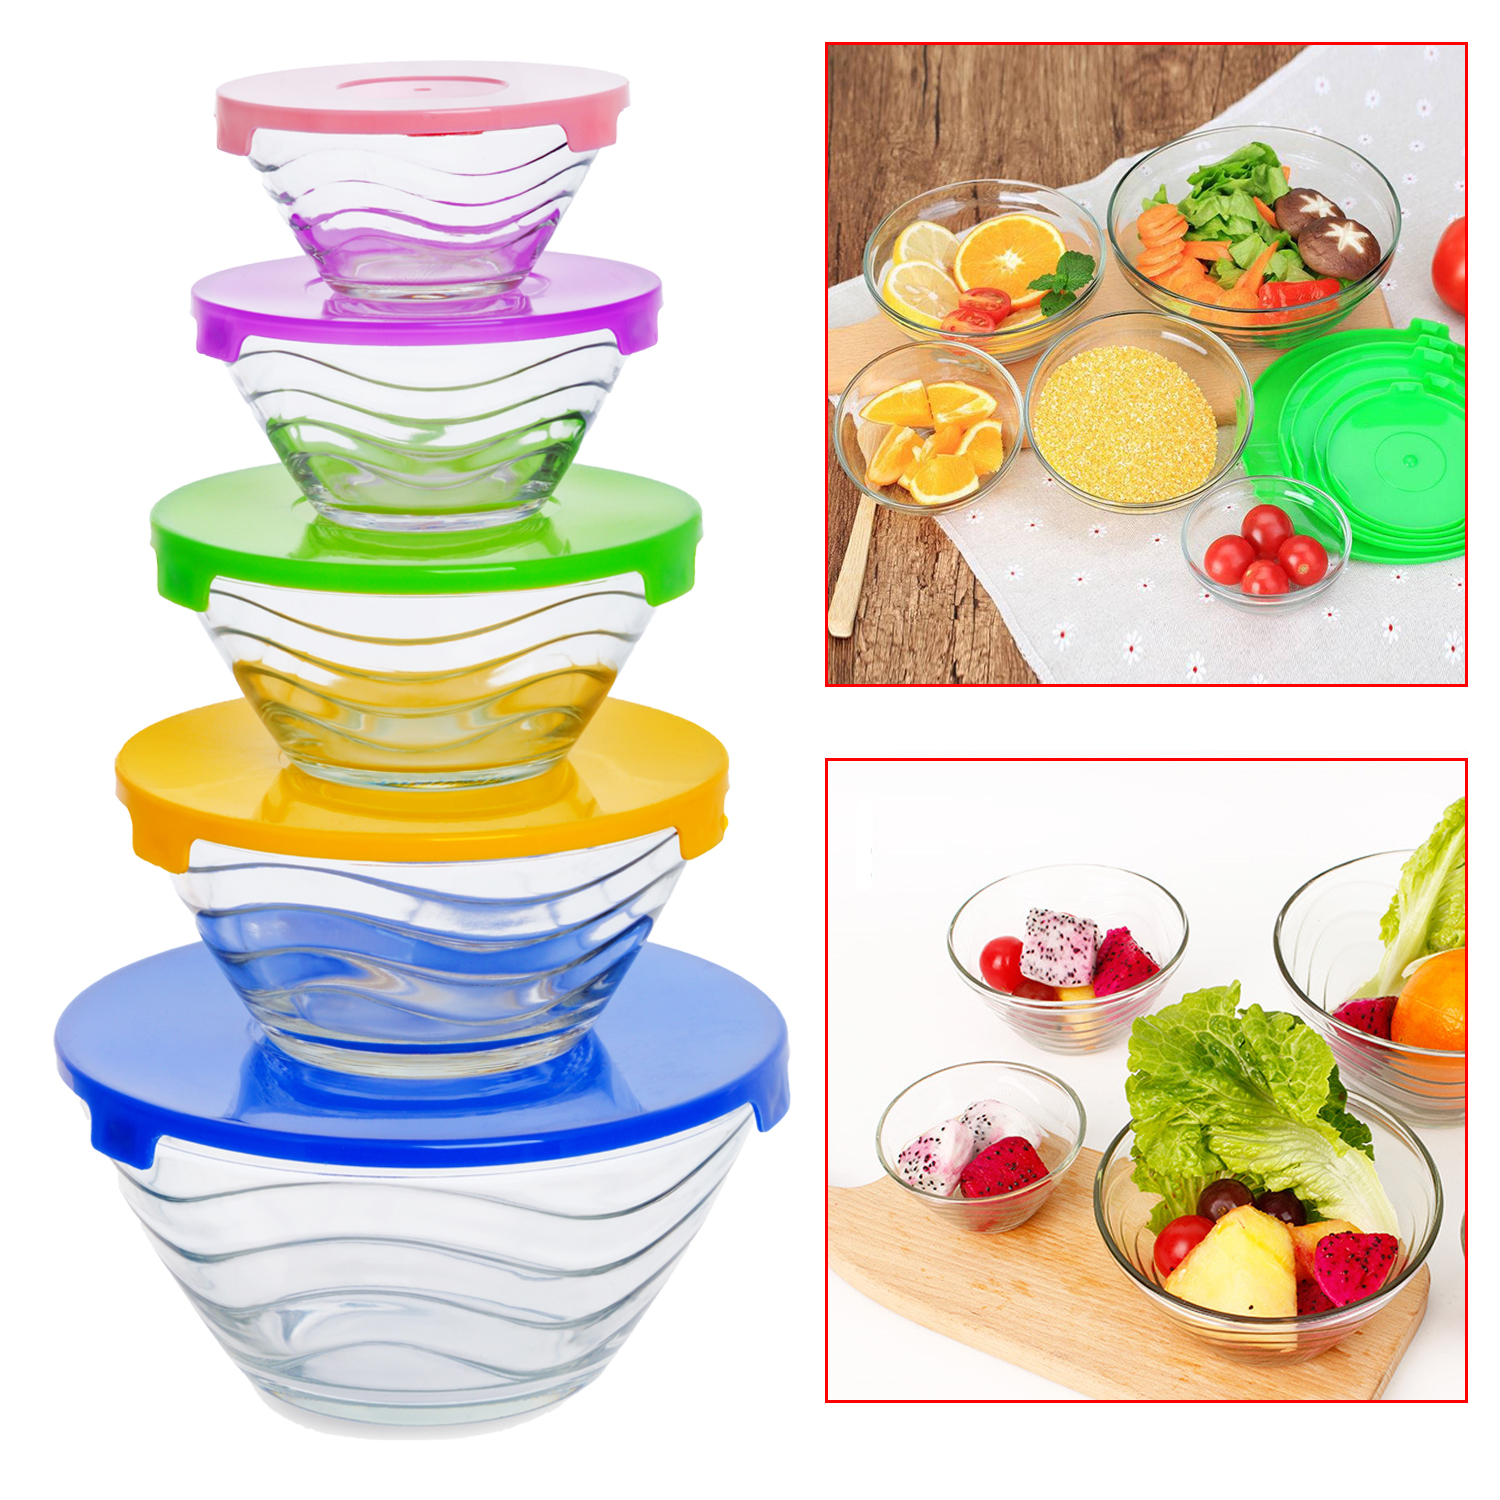 5 Pcs Glass Mixing Bowl Set With Cover Bowl Glass Mixing Bowl Salad Bowl Lunch Box Mask Bowl